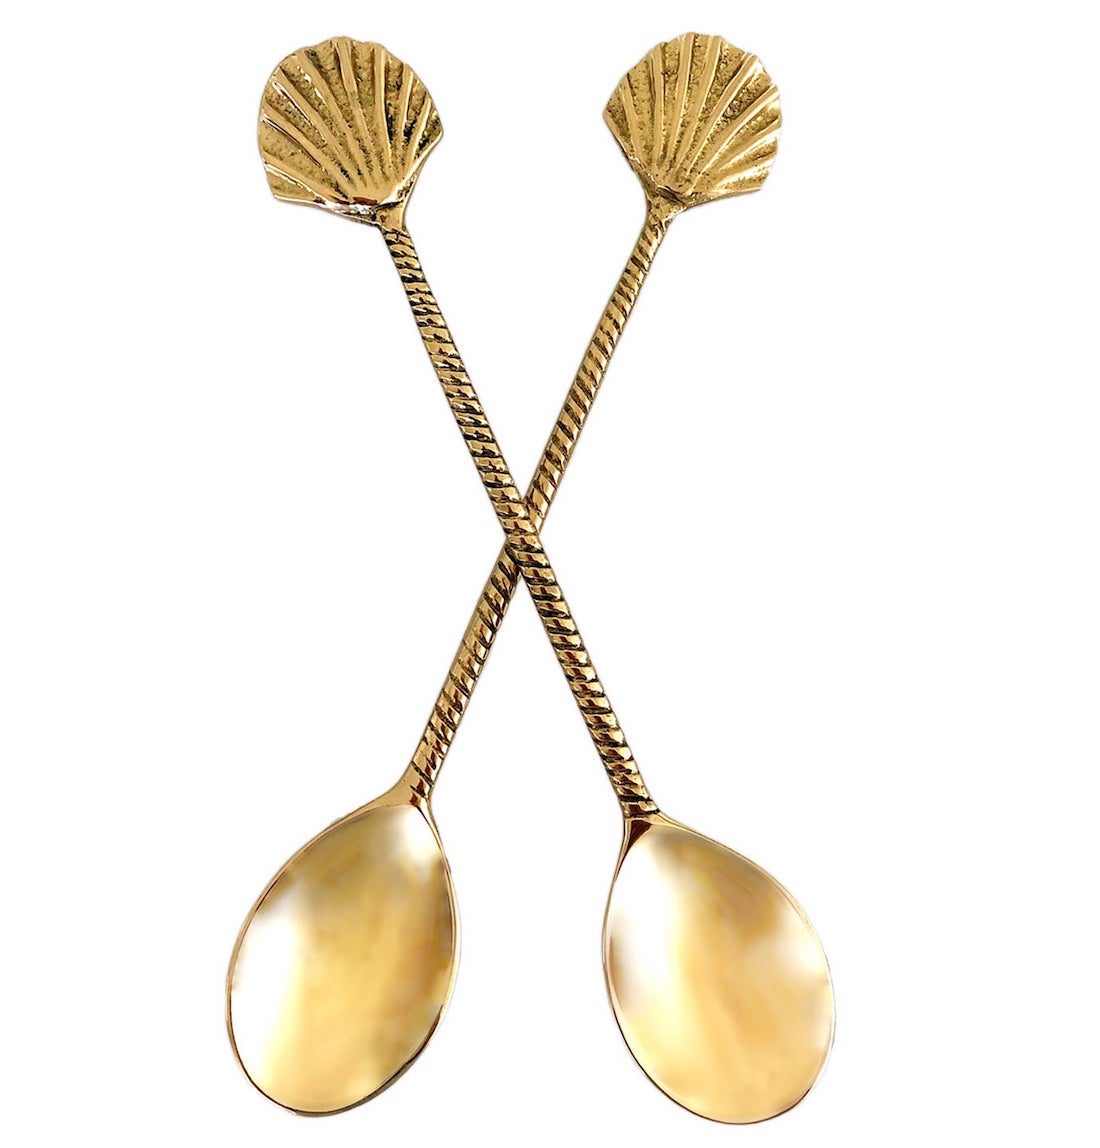 Gold shell spoons